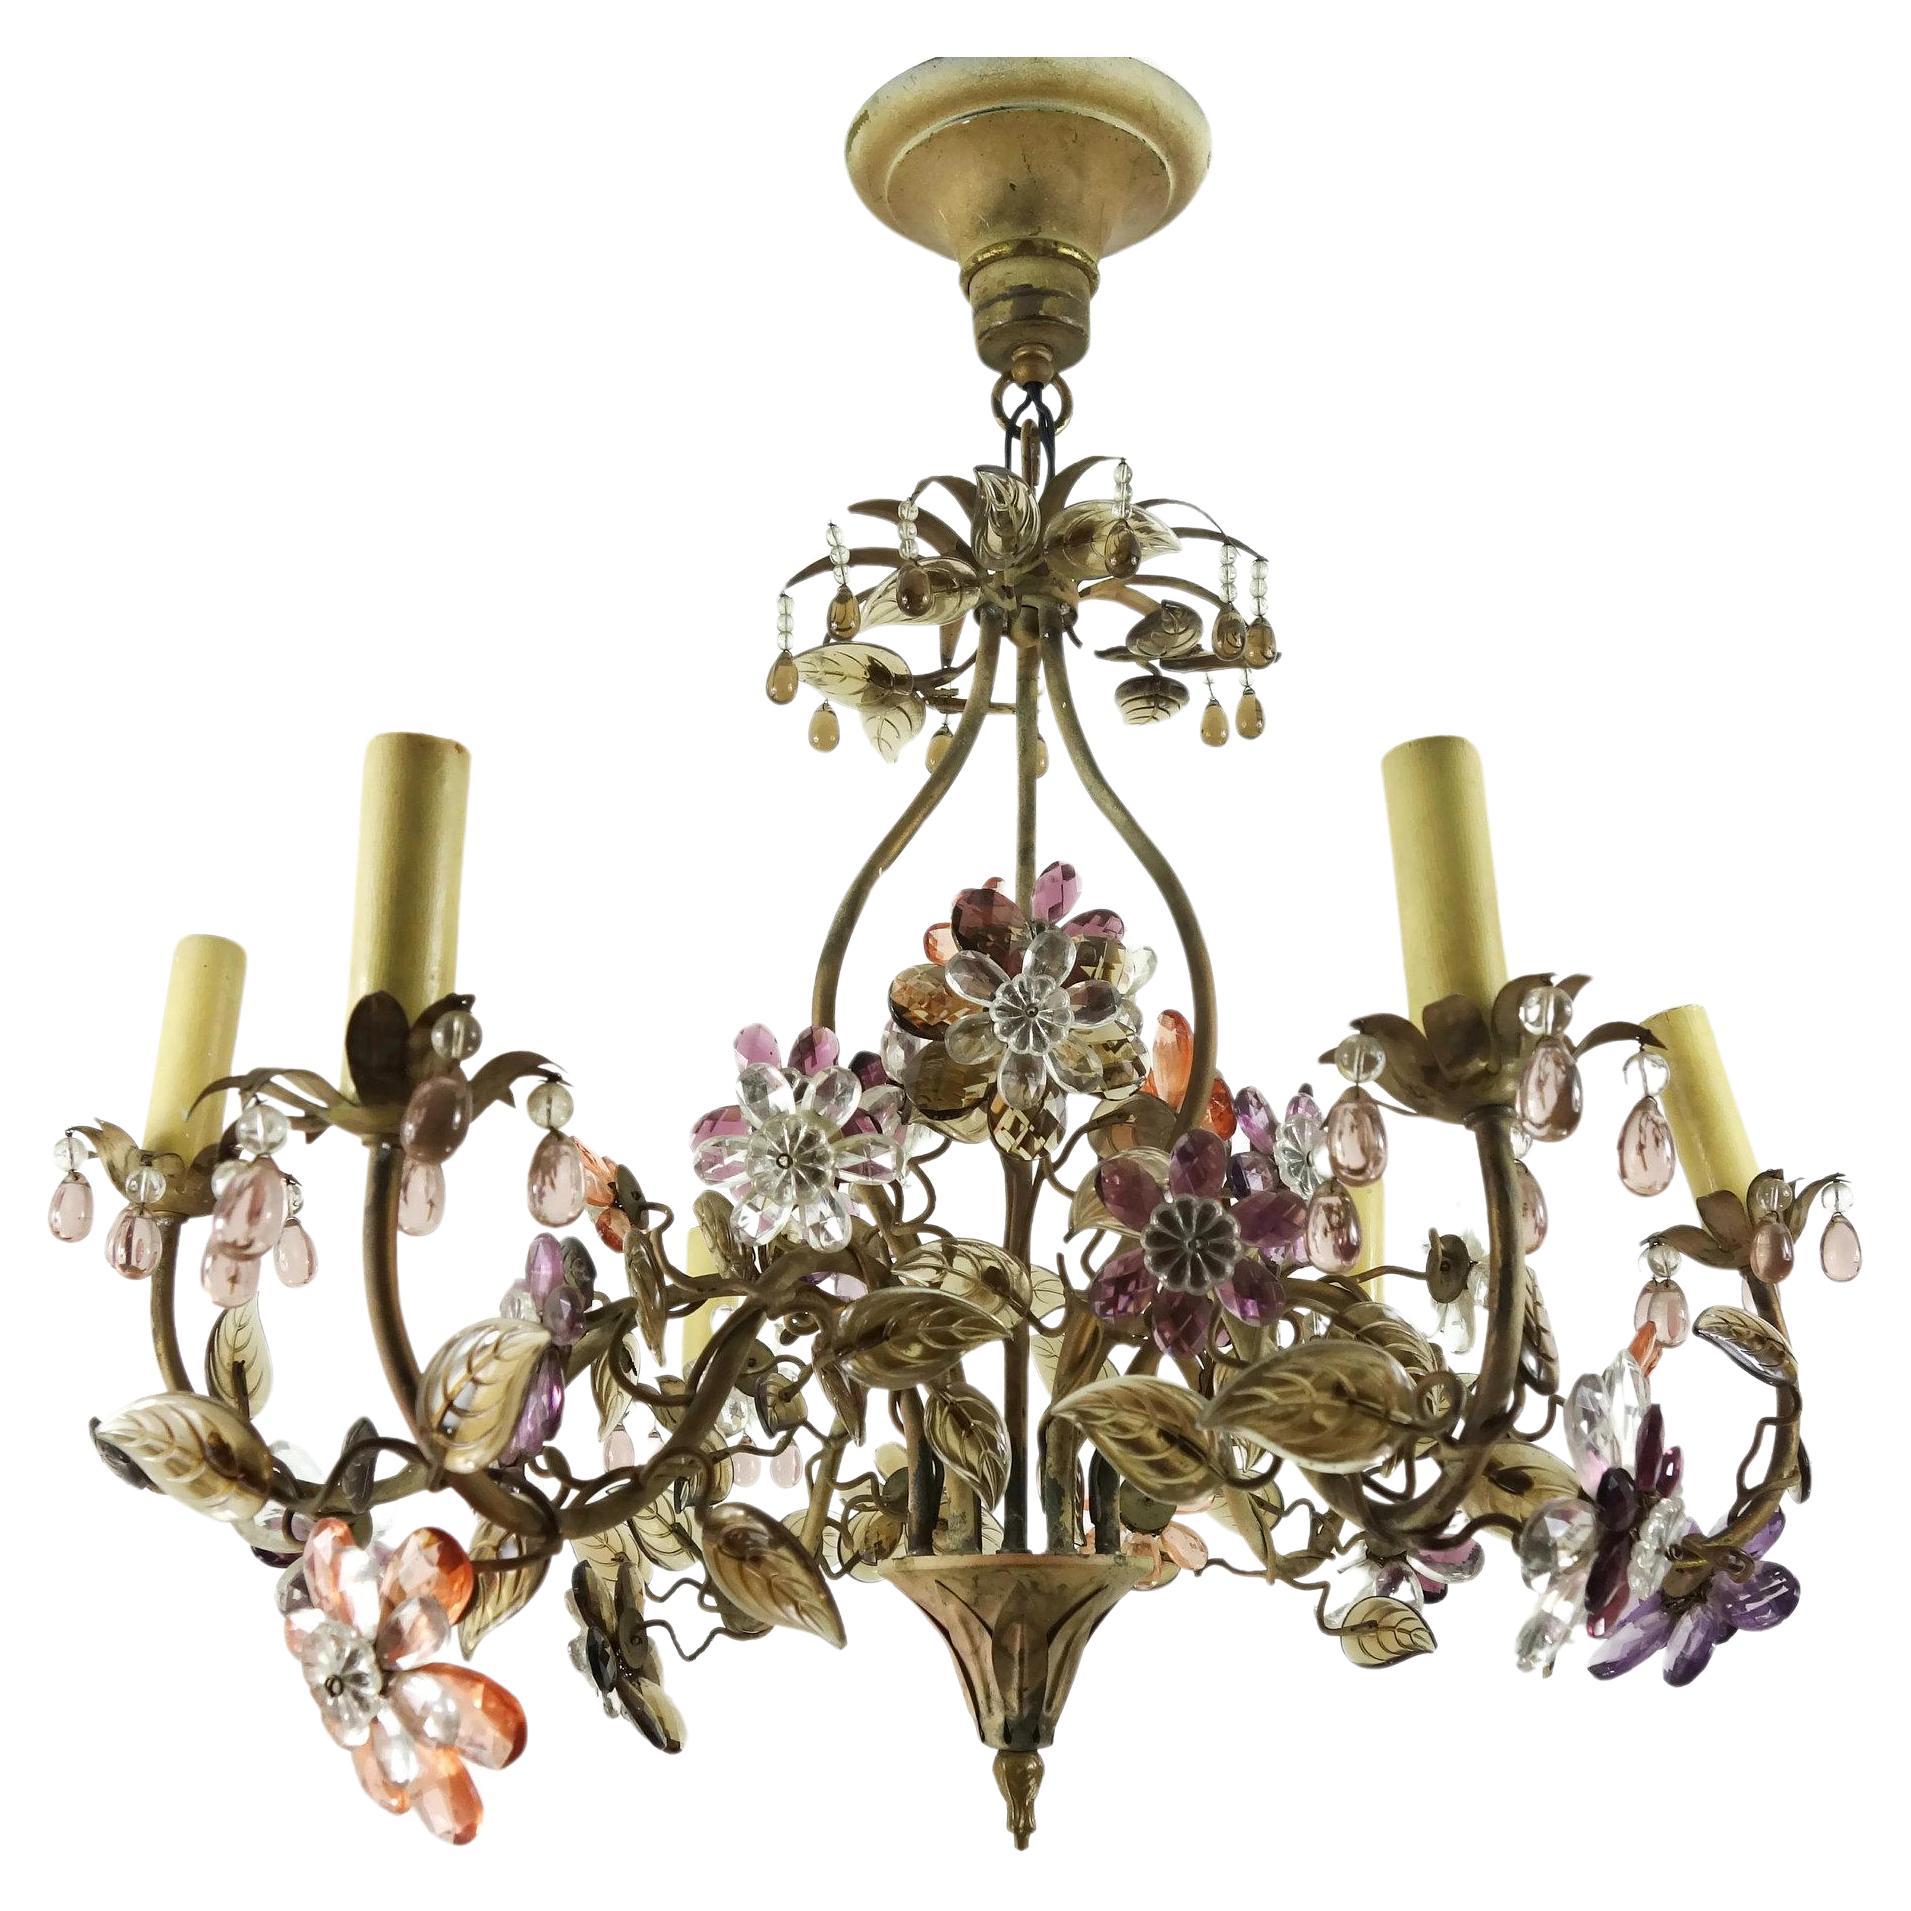 1940s French Regency Bouquet Colorful Crystal Flowers in Bronze Vase Chandelier